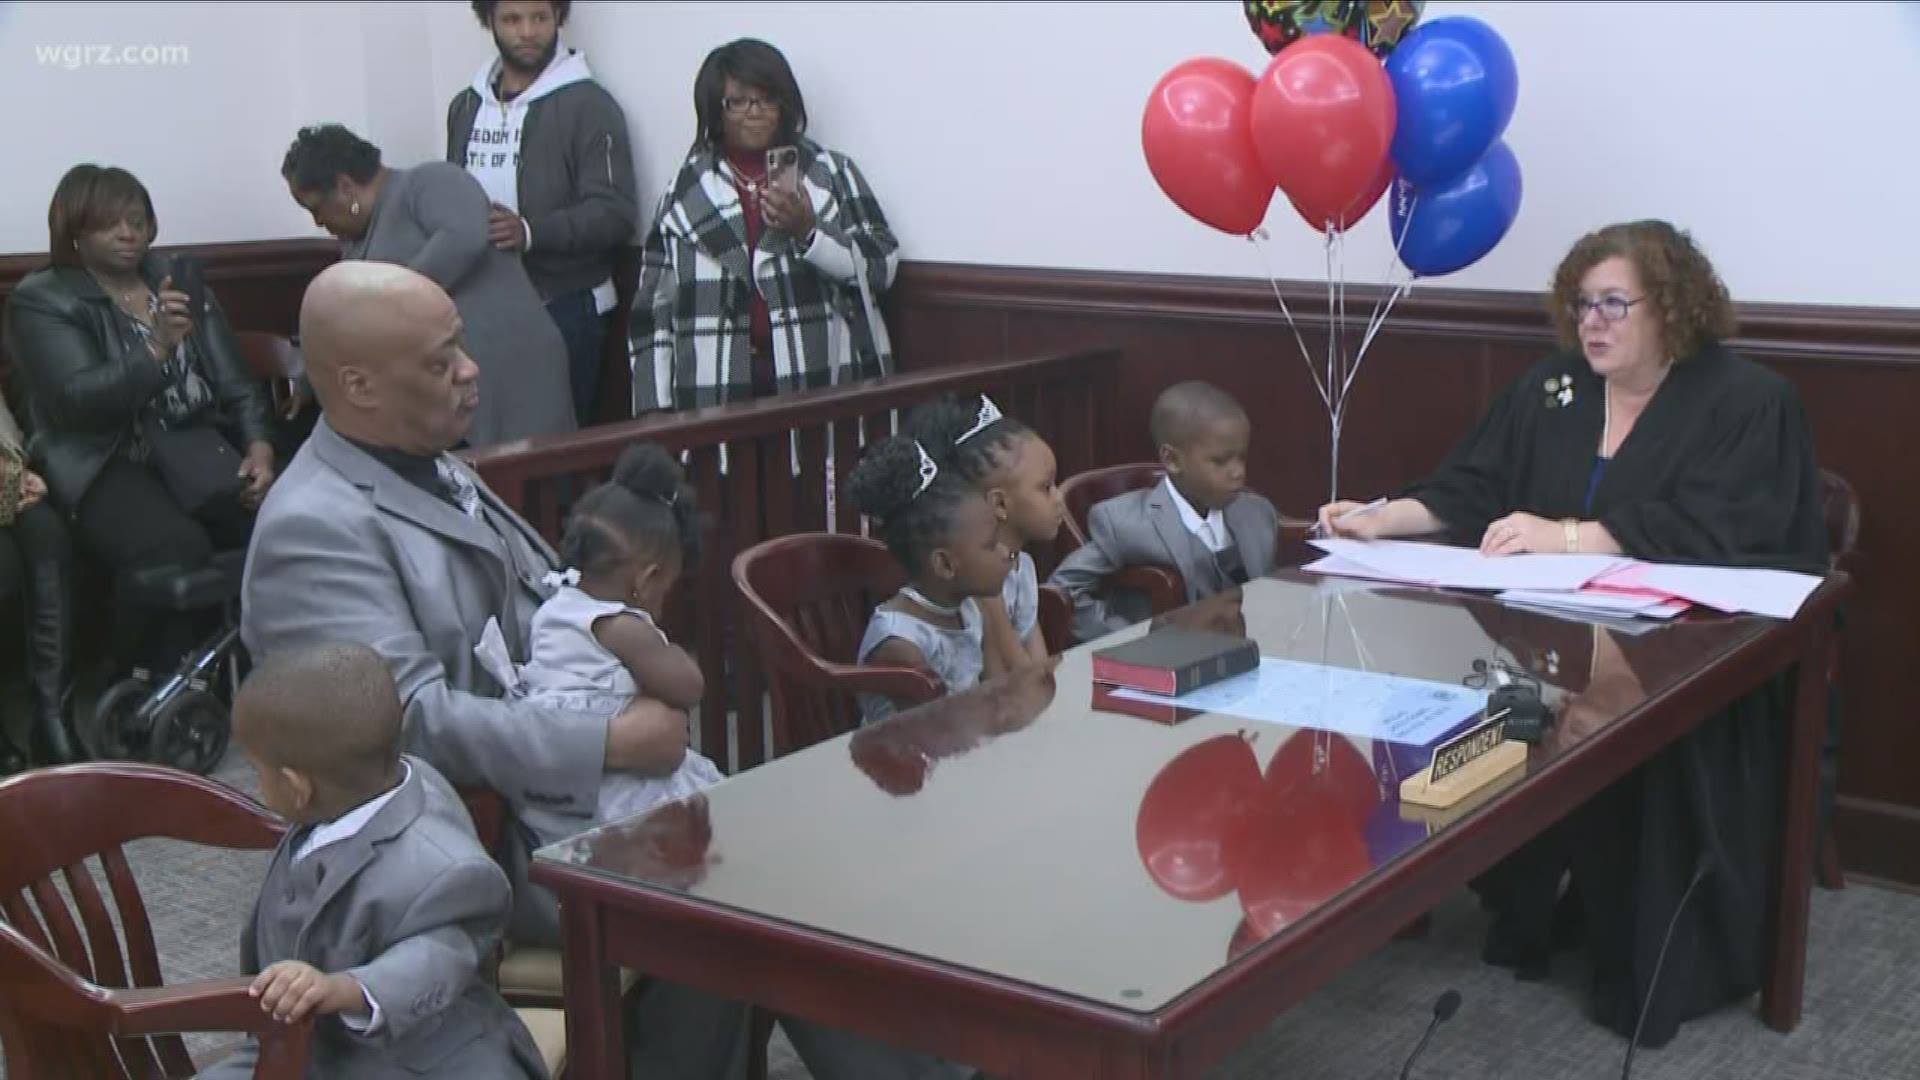 Lamont Thomas has fostered over 30-children and adopted close to a dozen.